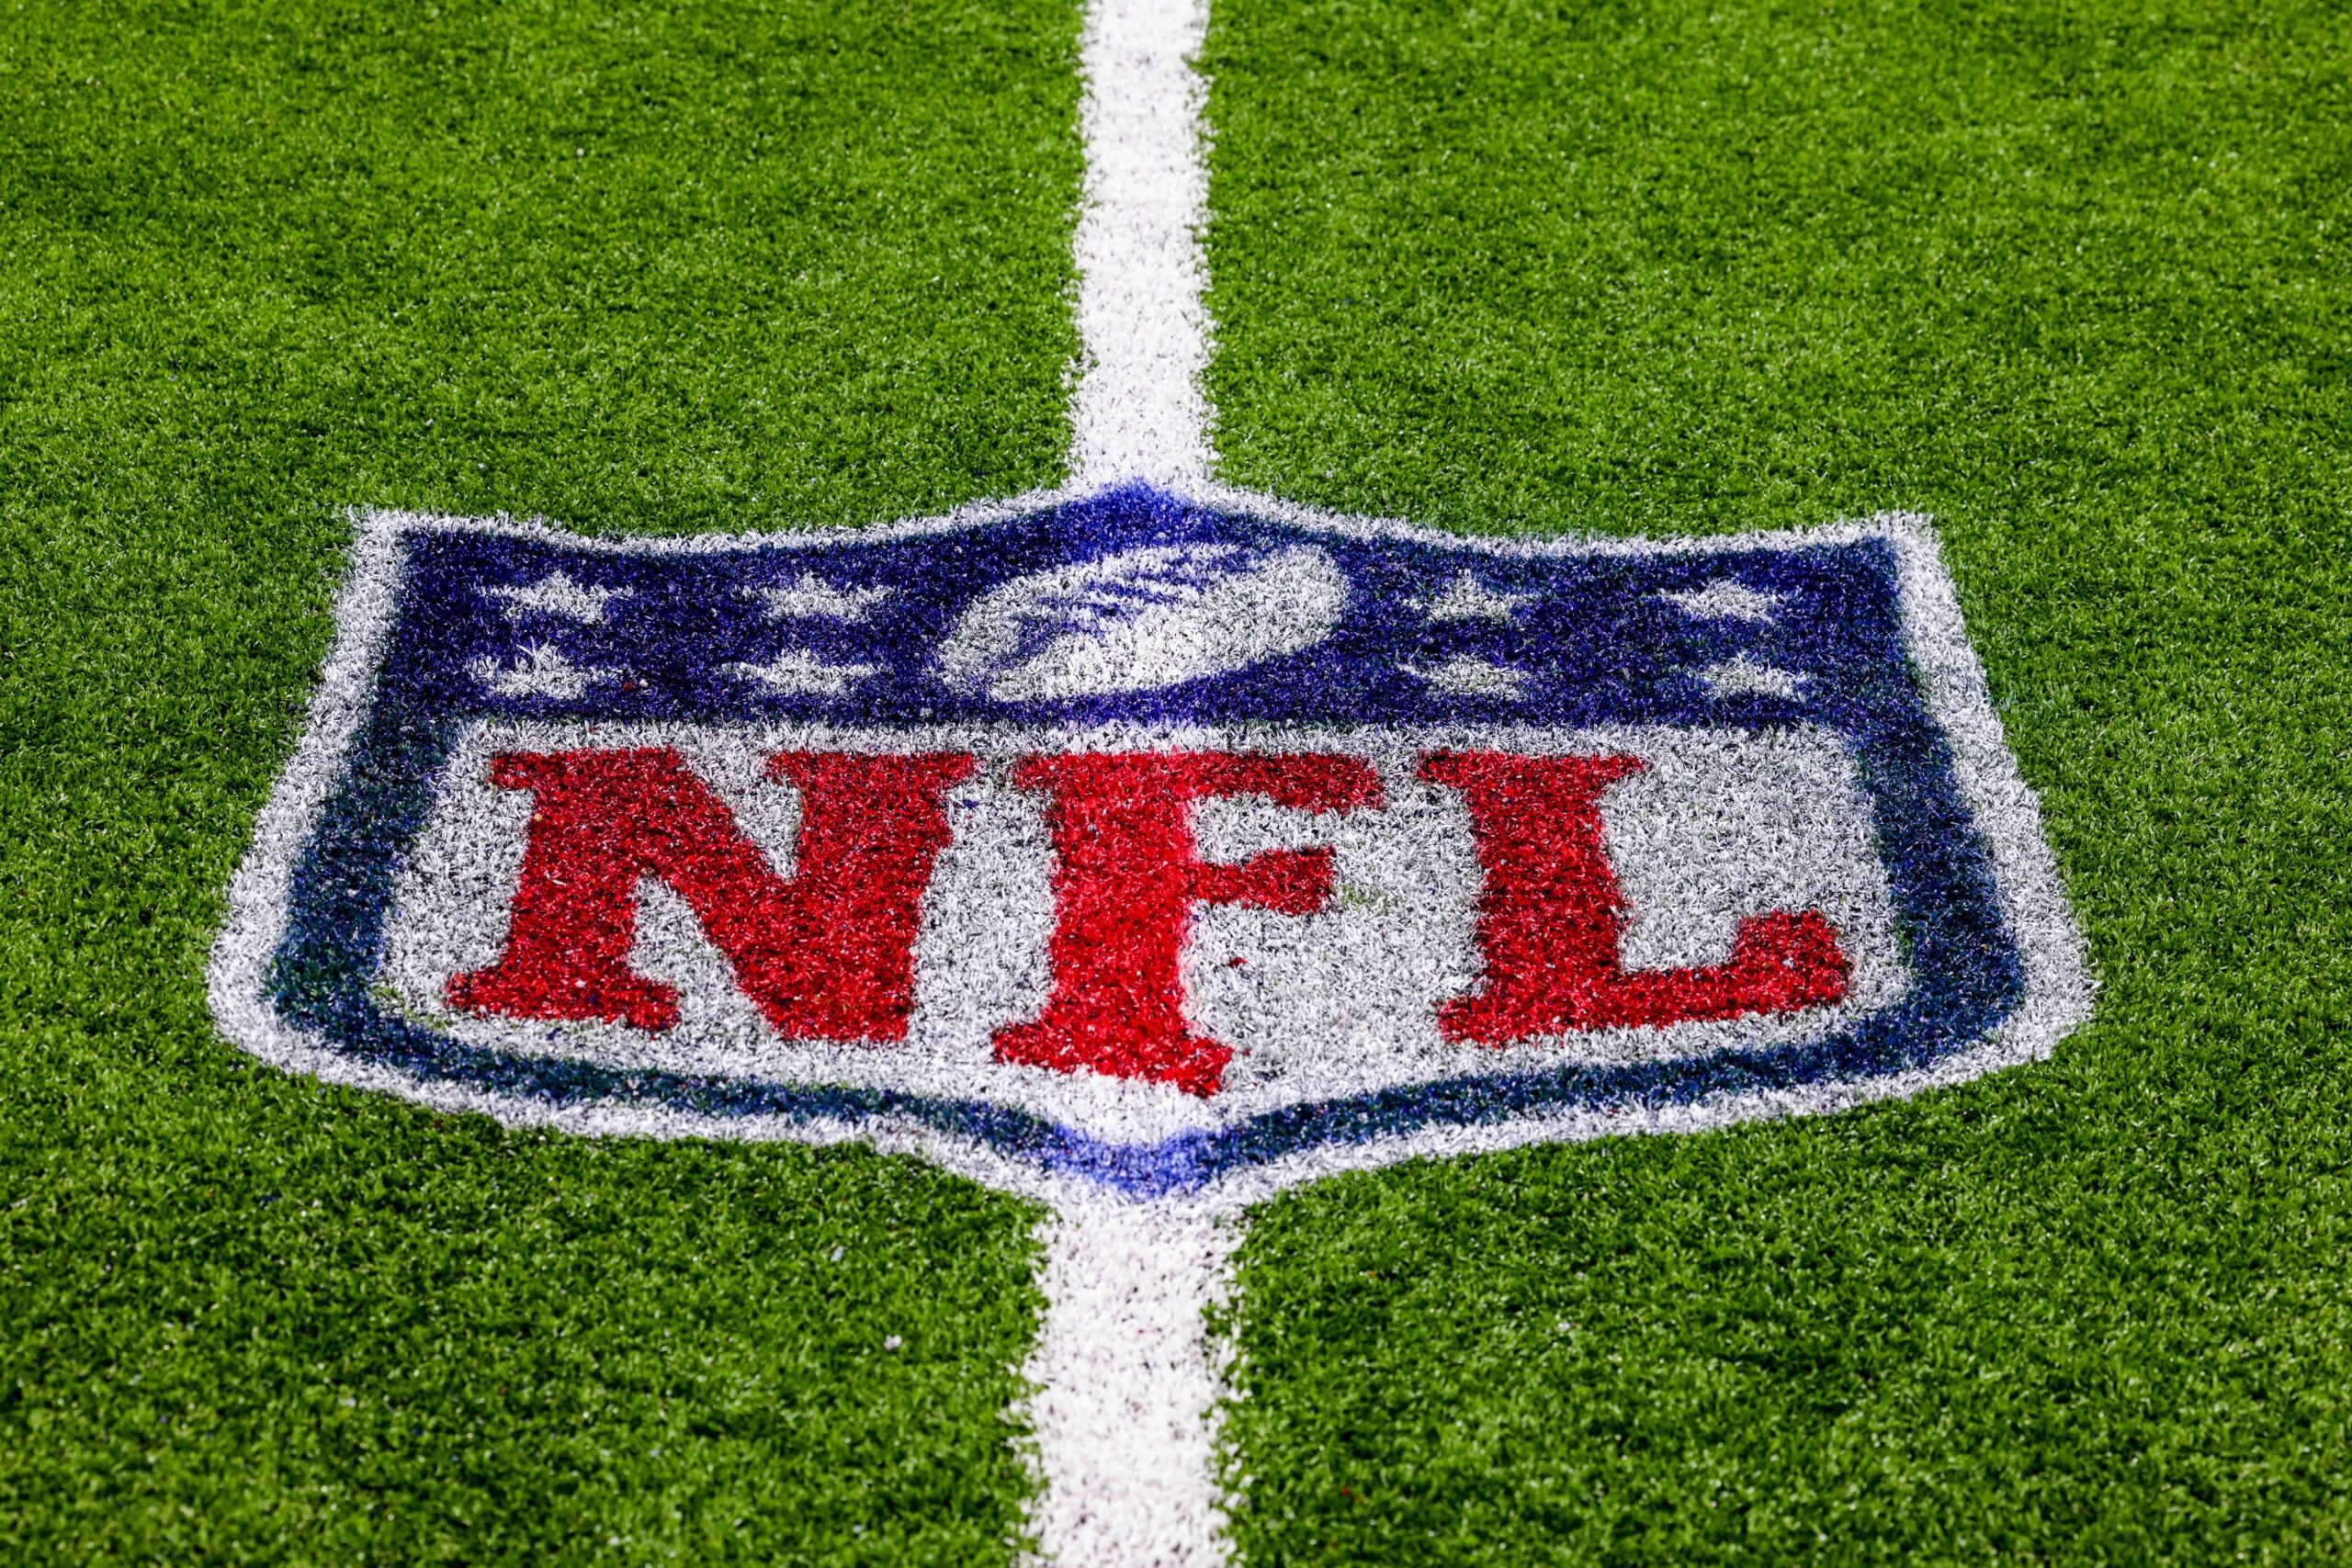 How To Watch the NFL Preseason 2023